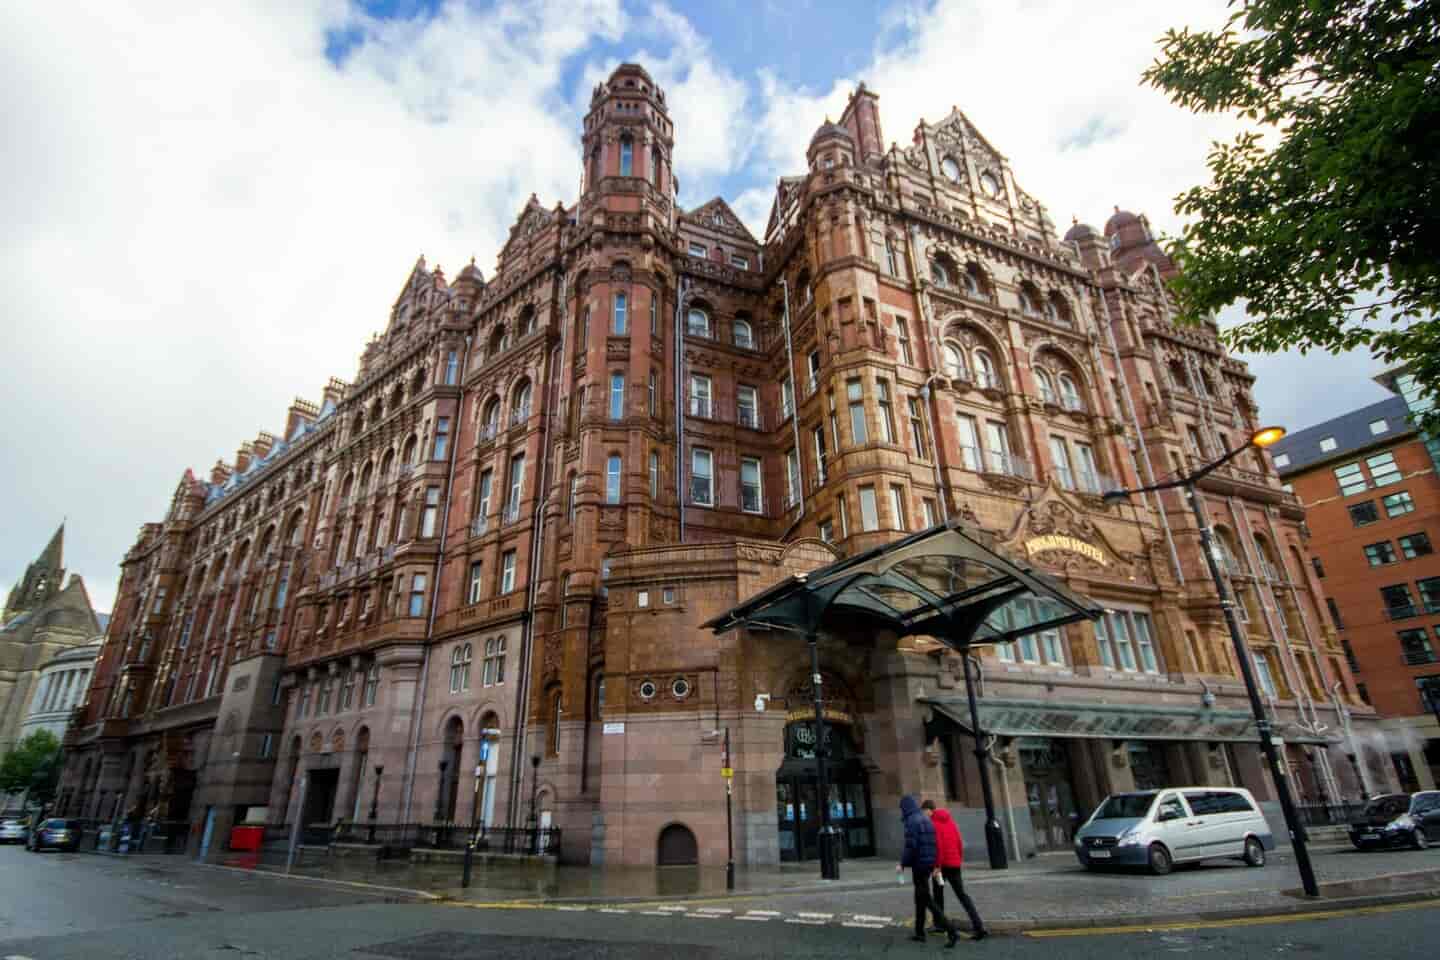 Student Accommodation in Manchester - The Midland Hotel on Peter Street